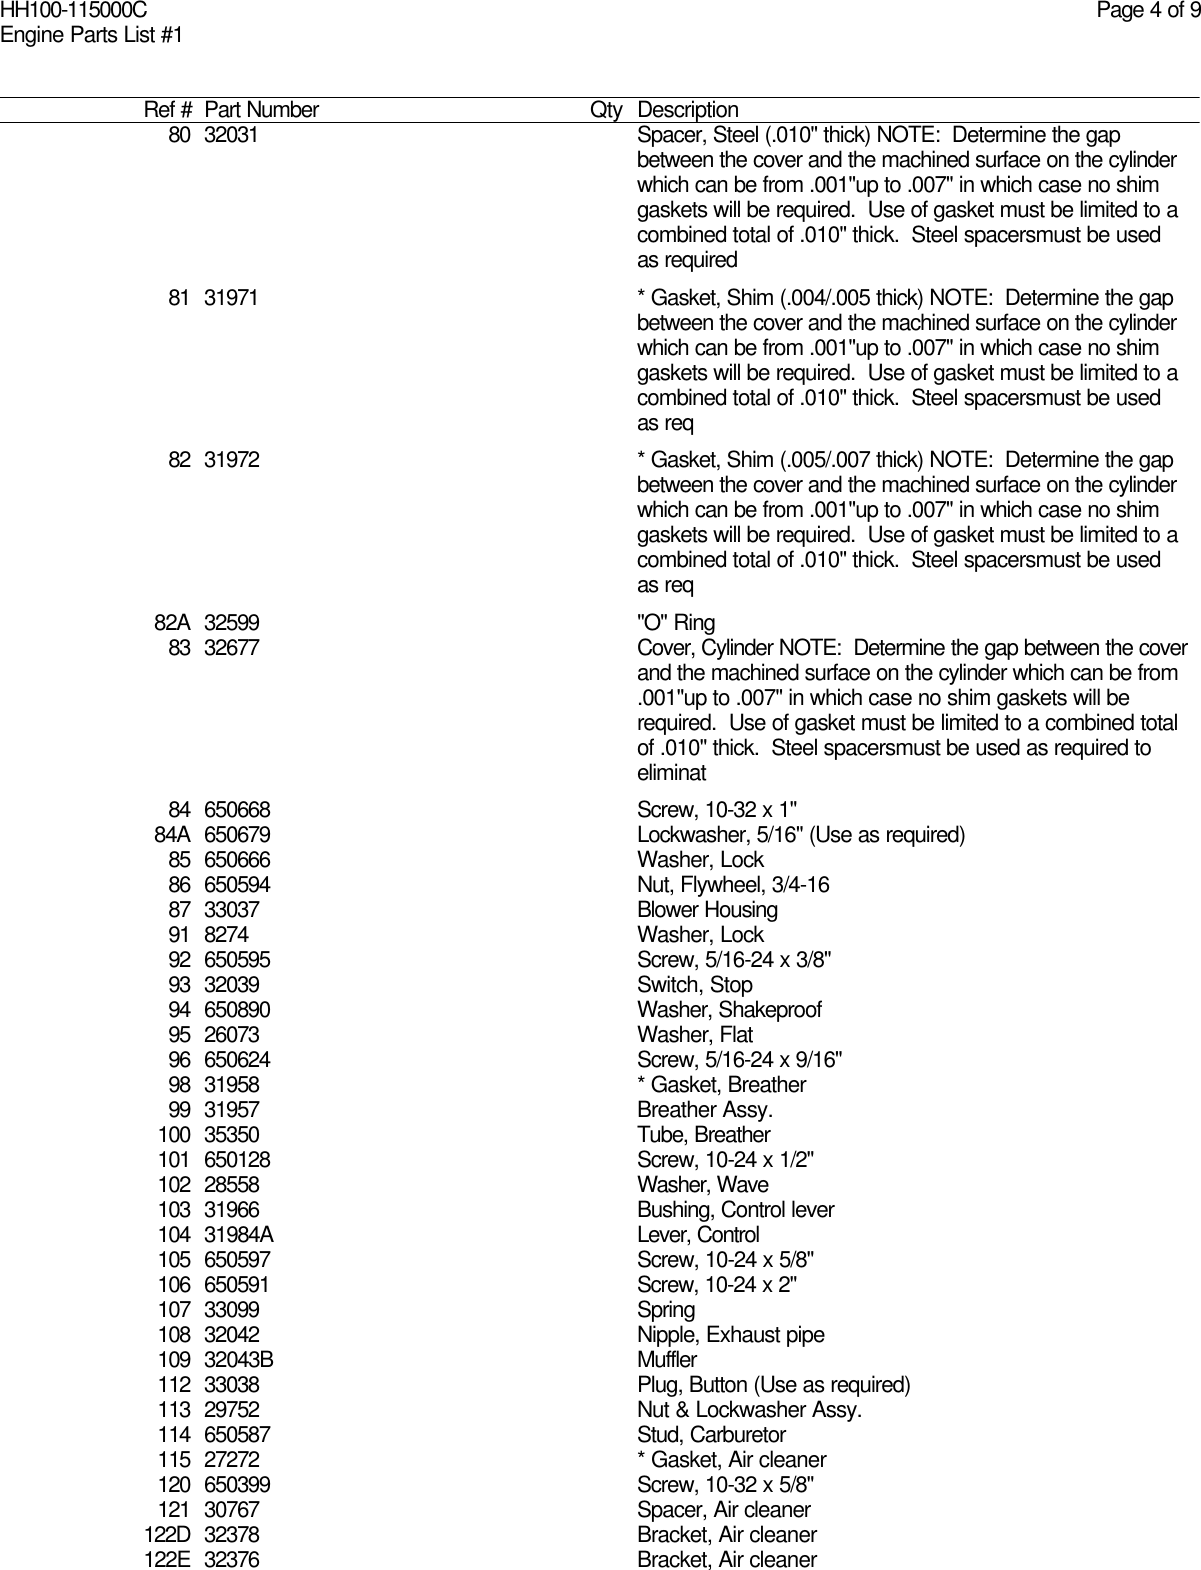 Page 4 of 9 - Diagram And/or PartsList Tecumseh HH100-115000C Parts List